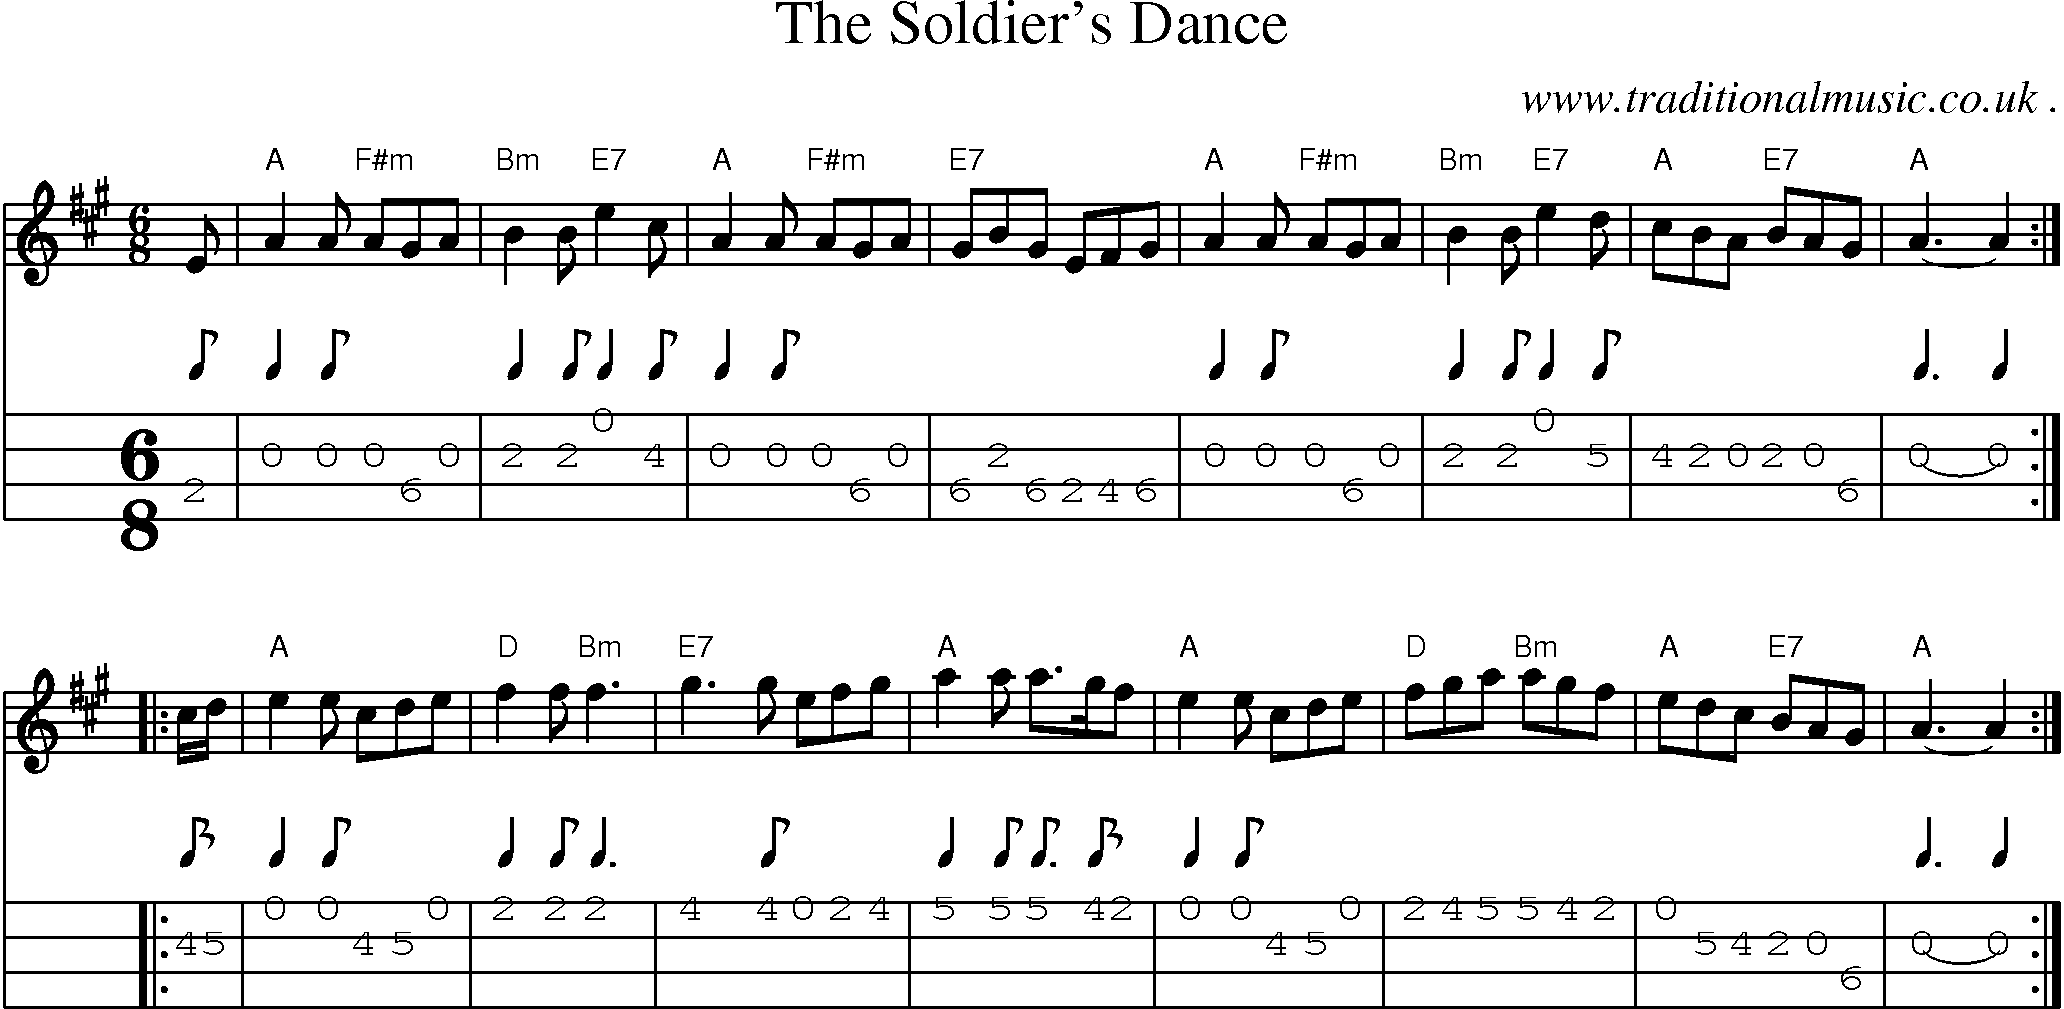 Sheet-music  score, Chords and Mandolin Tabs for The Soldiers Dance